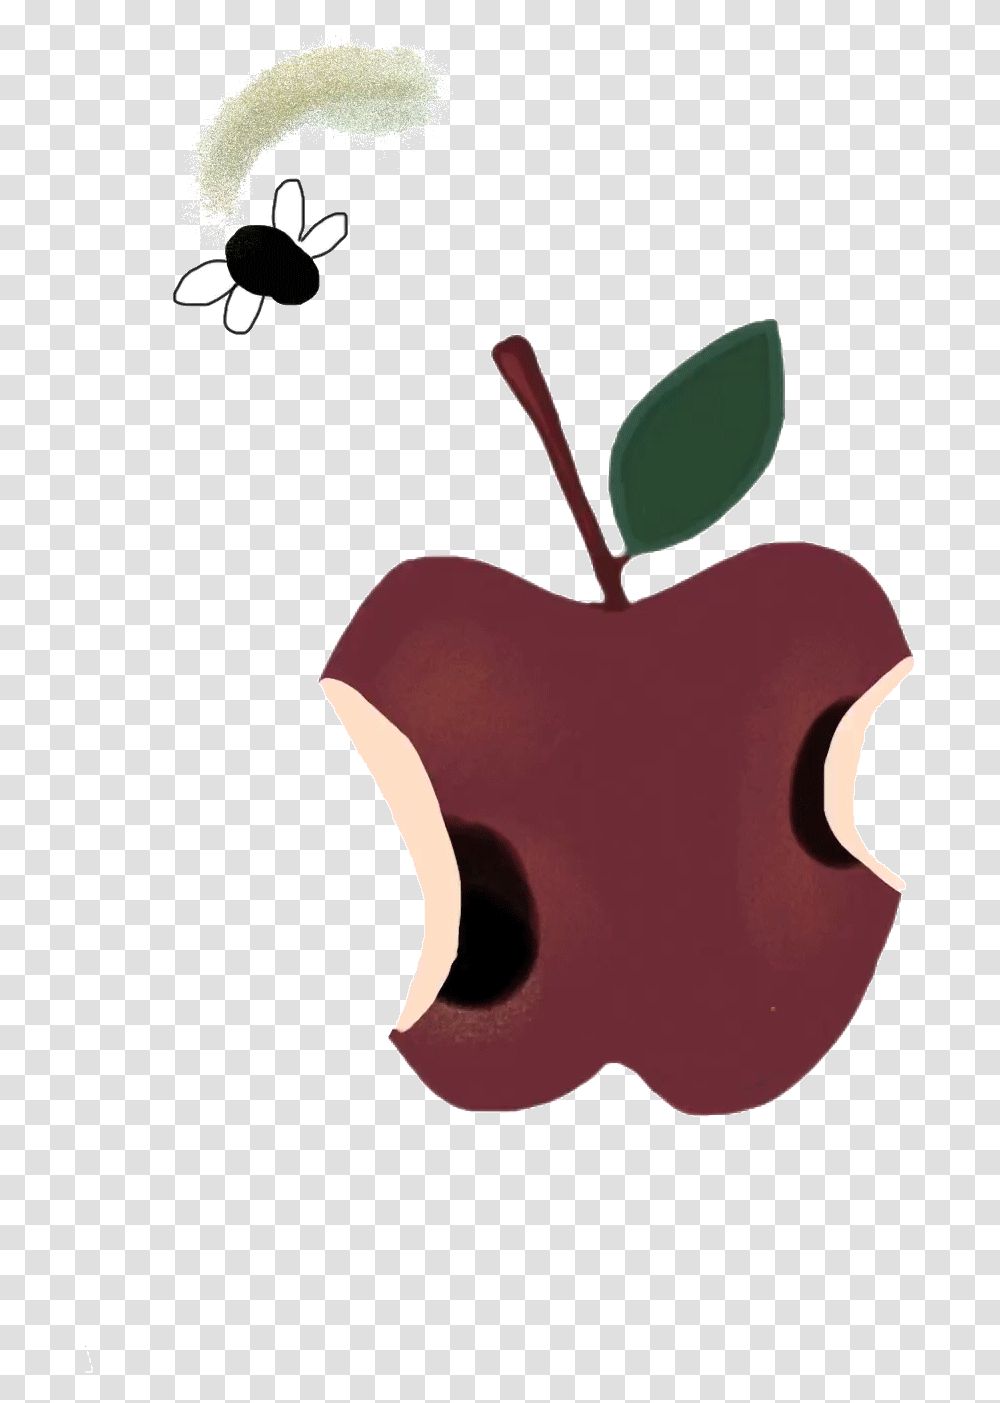 Library Of Apple Image Freeuse Gif Files Animated Apple Tree Gif Cartoon, Plant, Fruit, Food Transparent Png